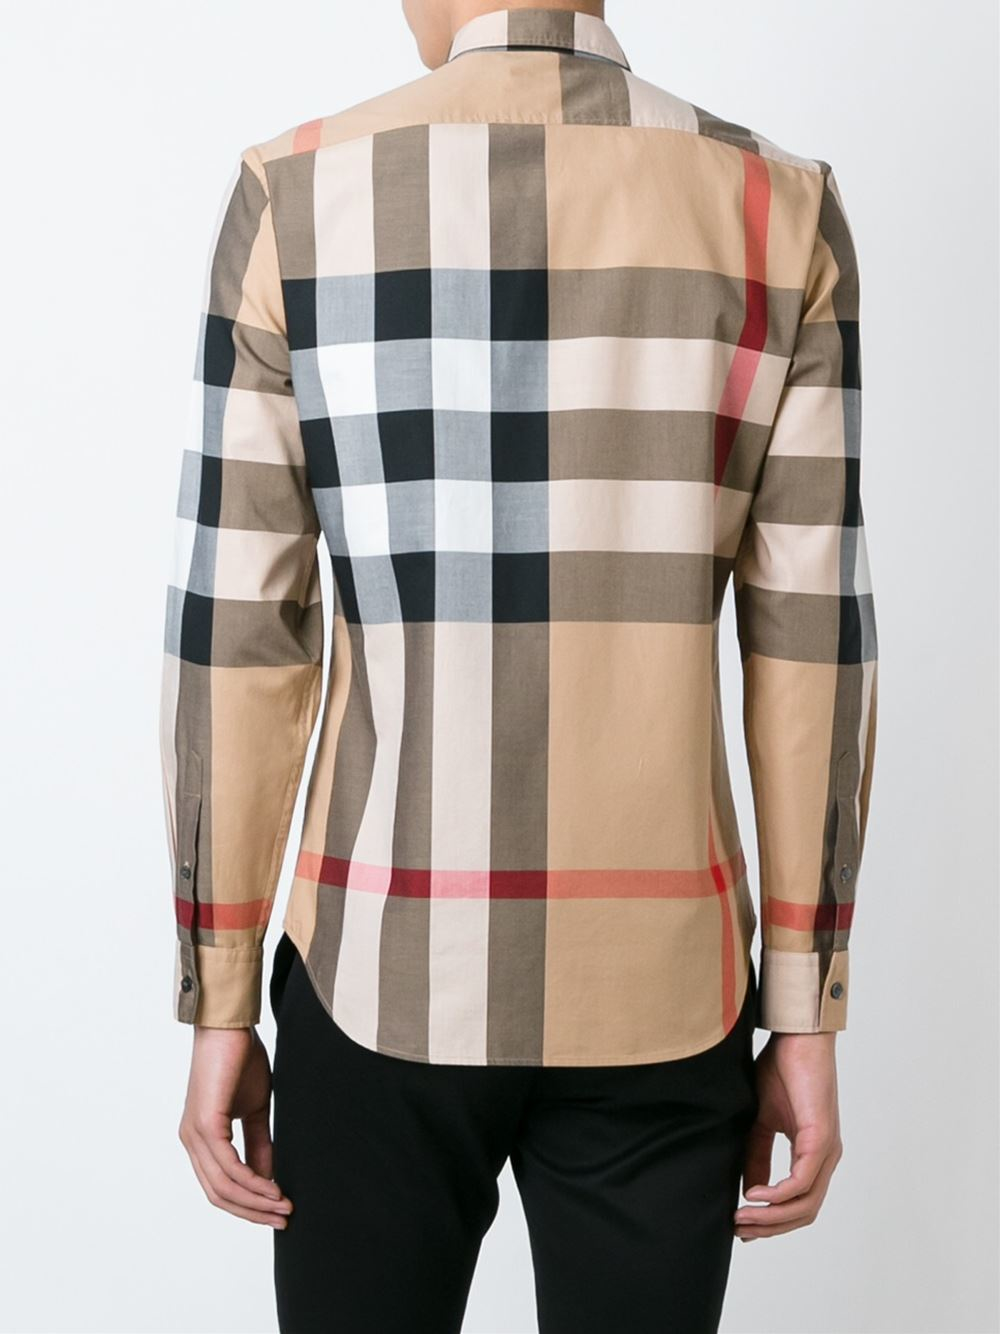 Lyst - Burberry Checked Shirt in Black for Men